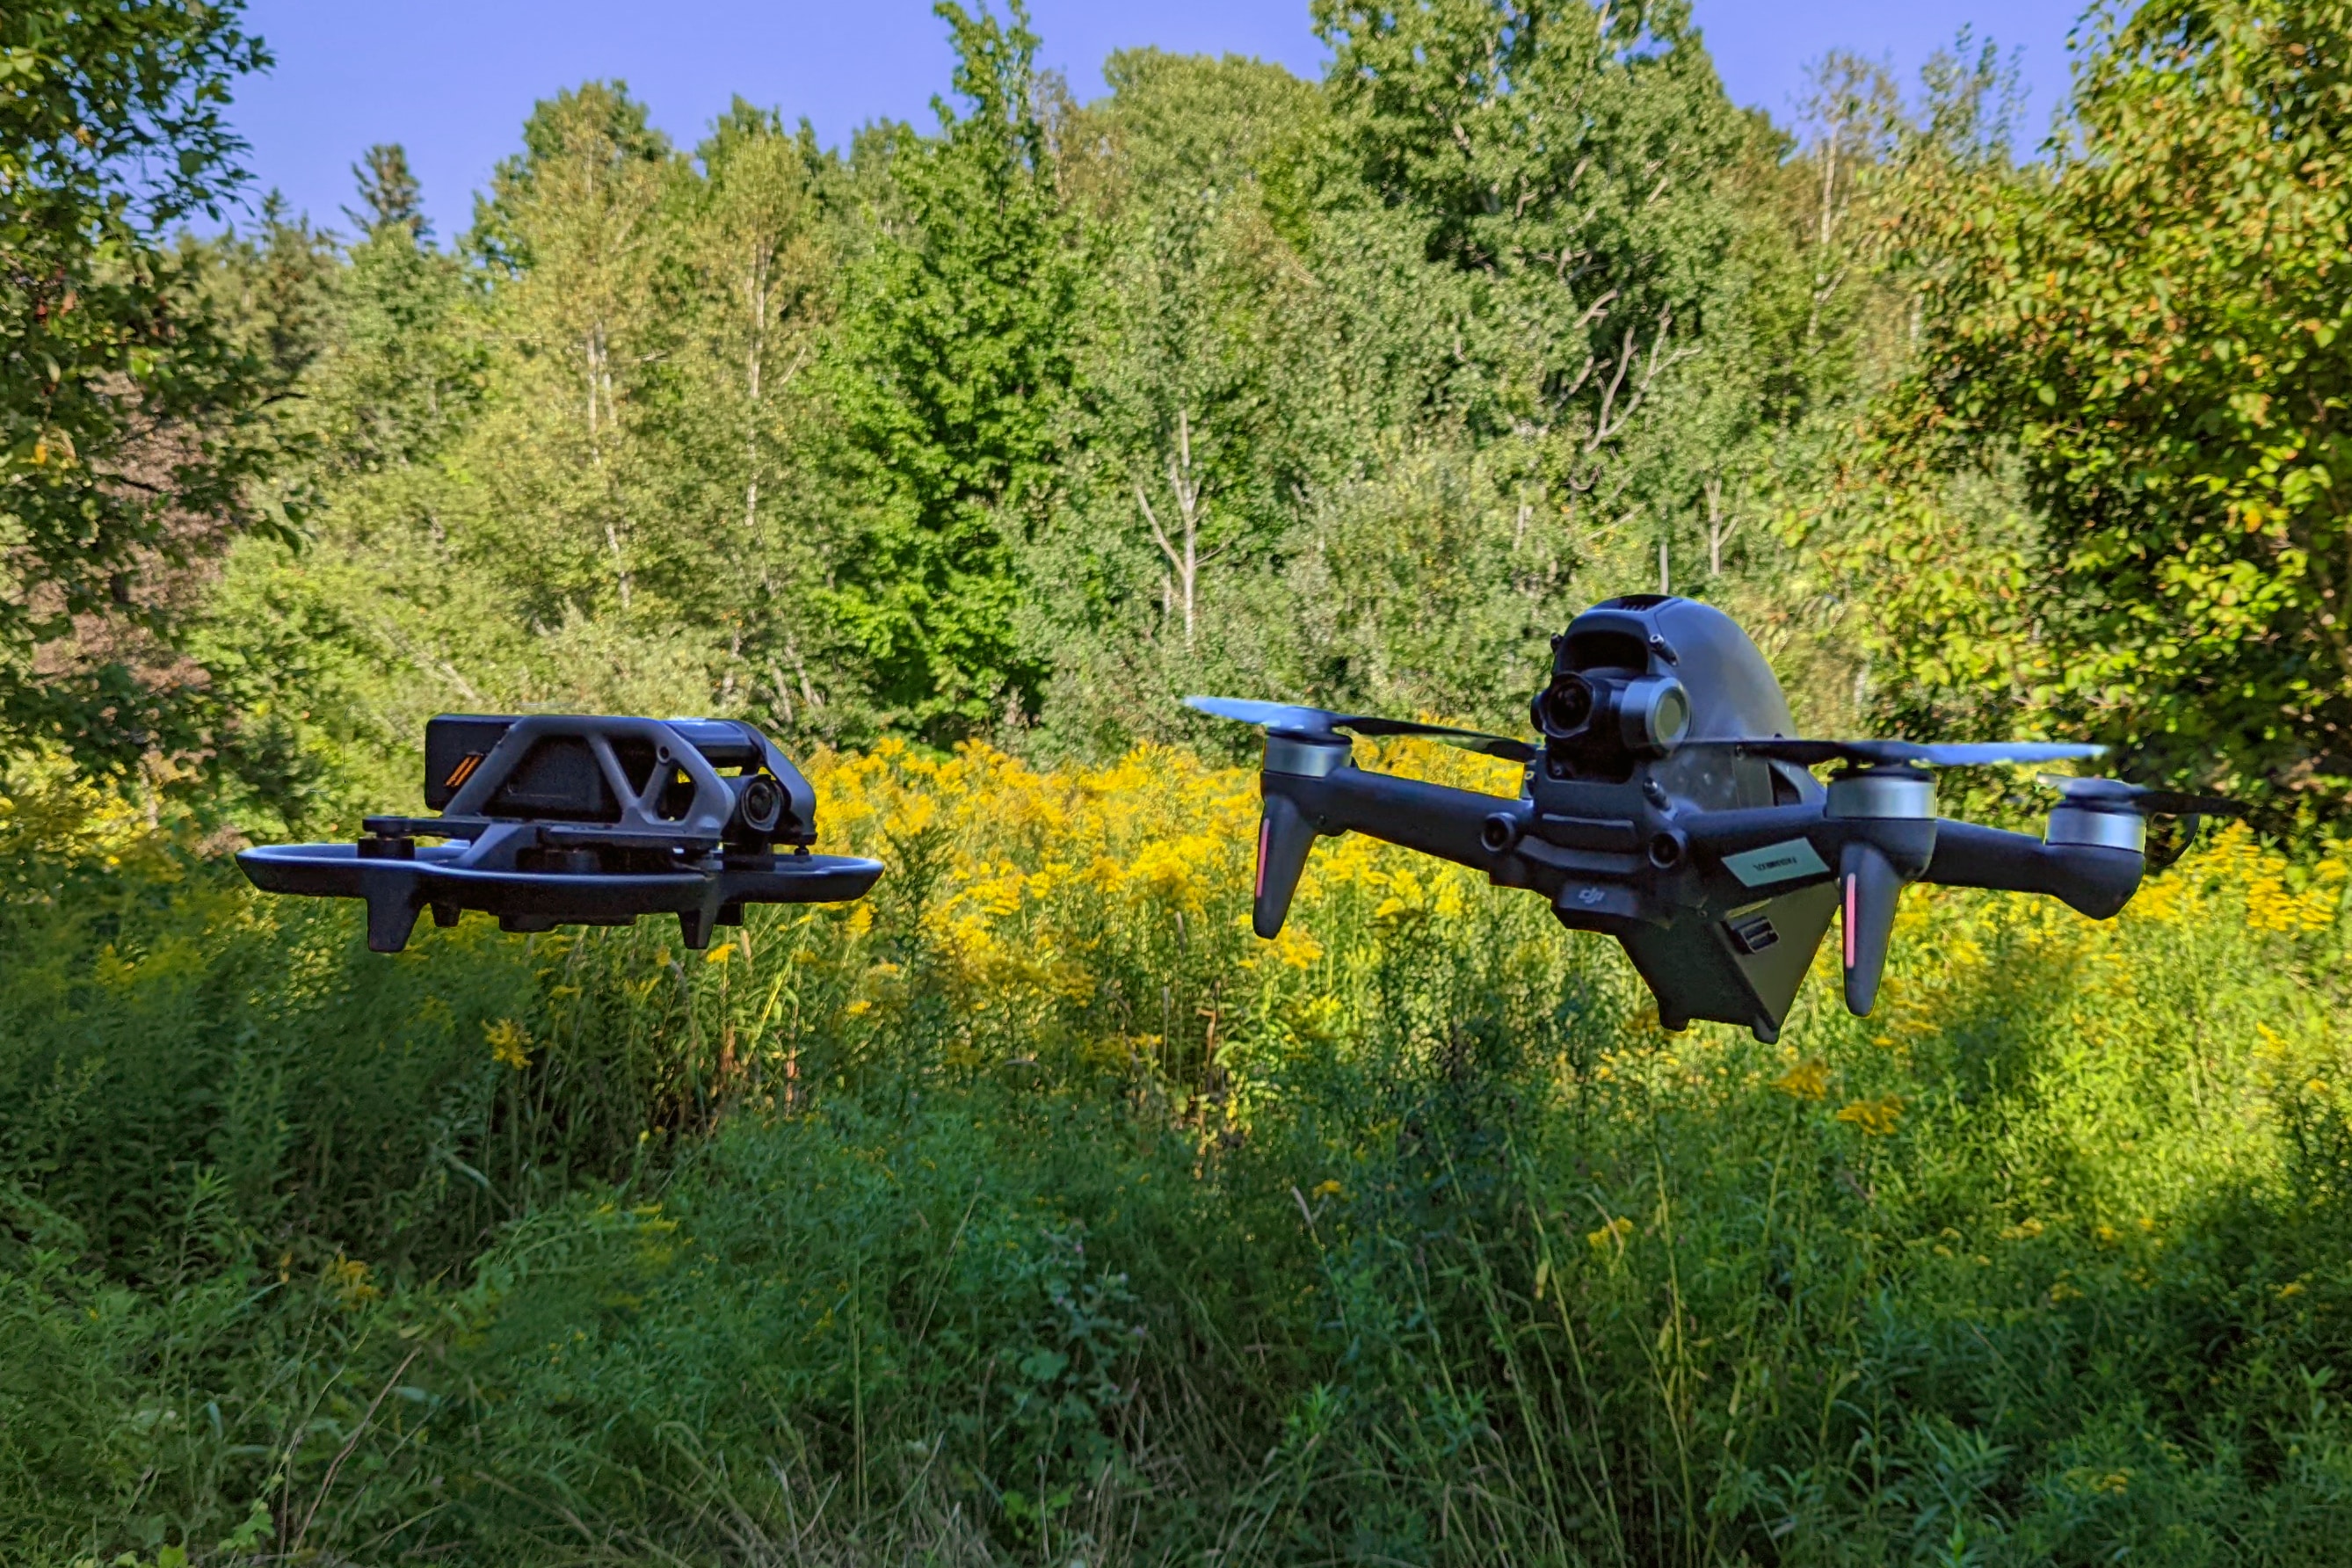 The DJI Avata and How It Compares to FPV Drones